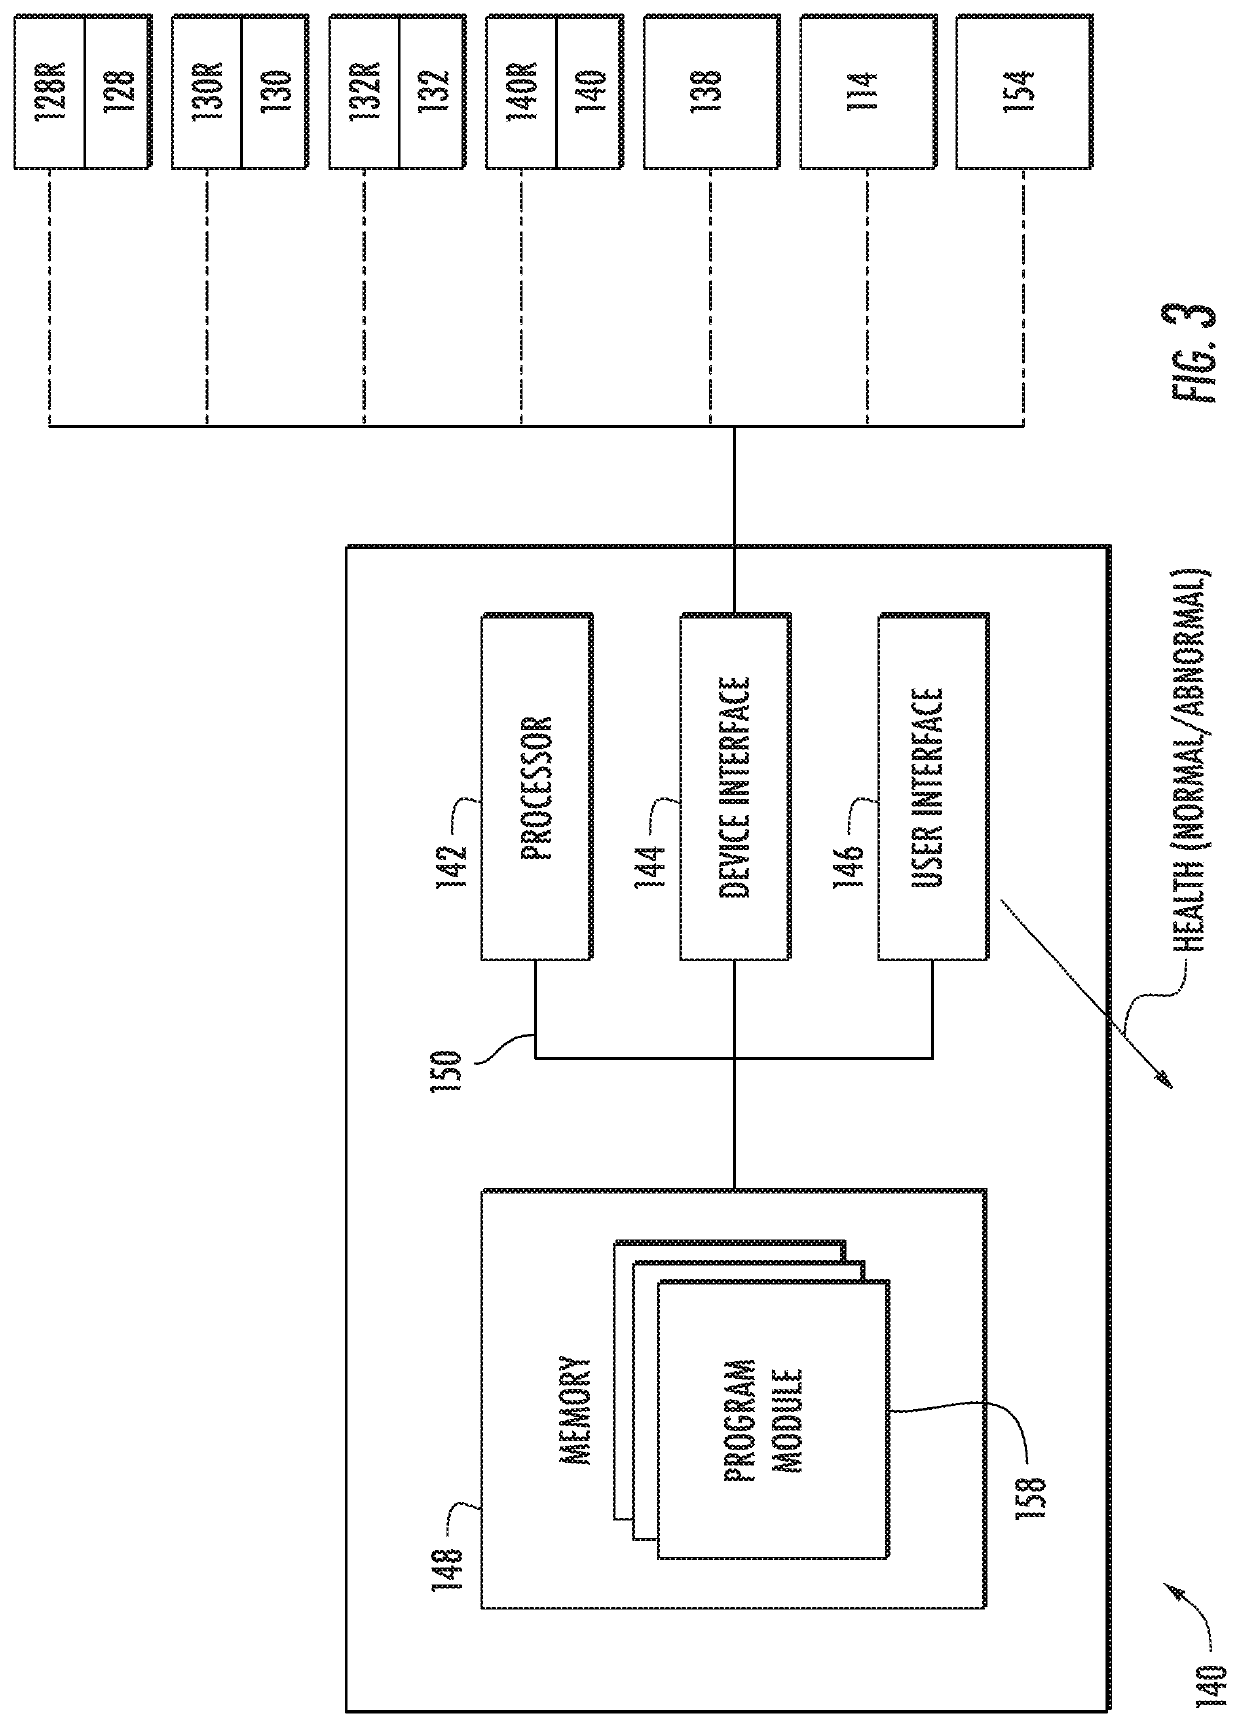 Systems and methods for controlling gas flow in transportation refrigeration systems